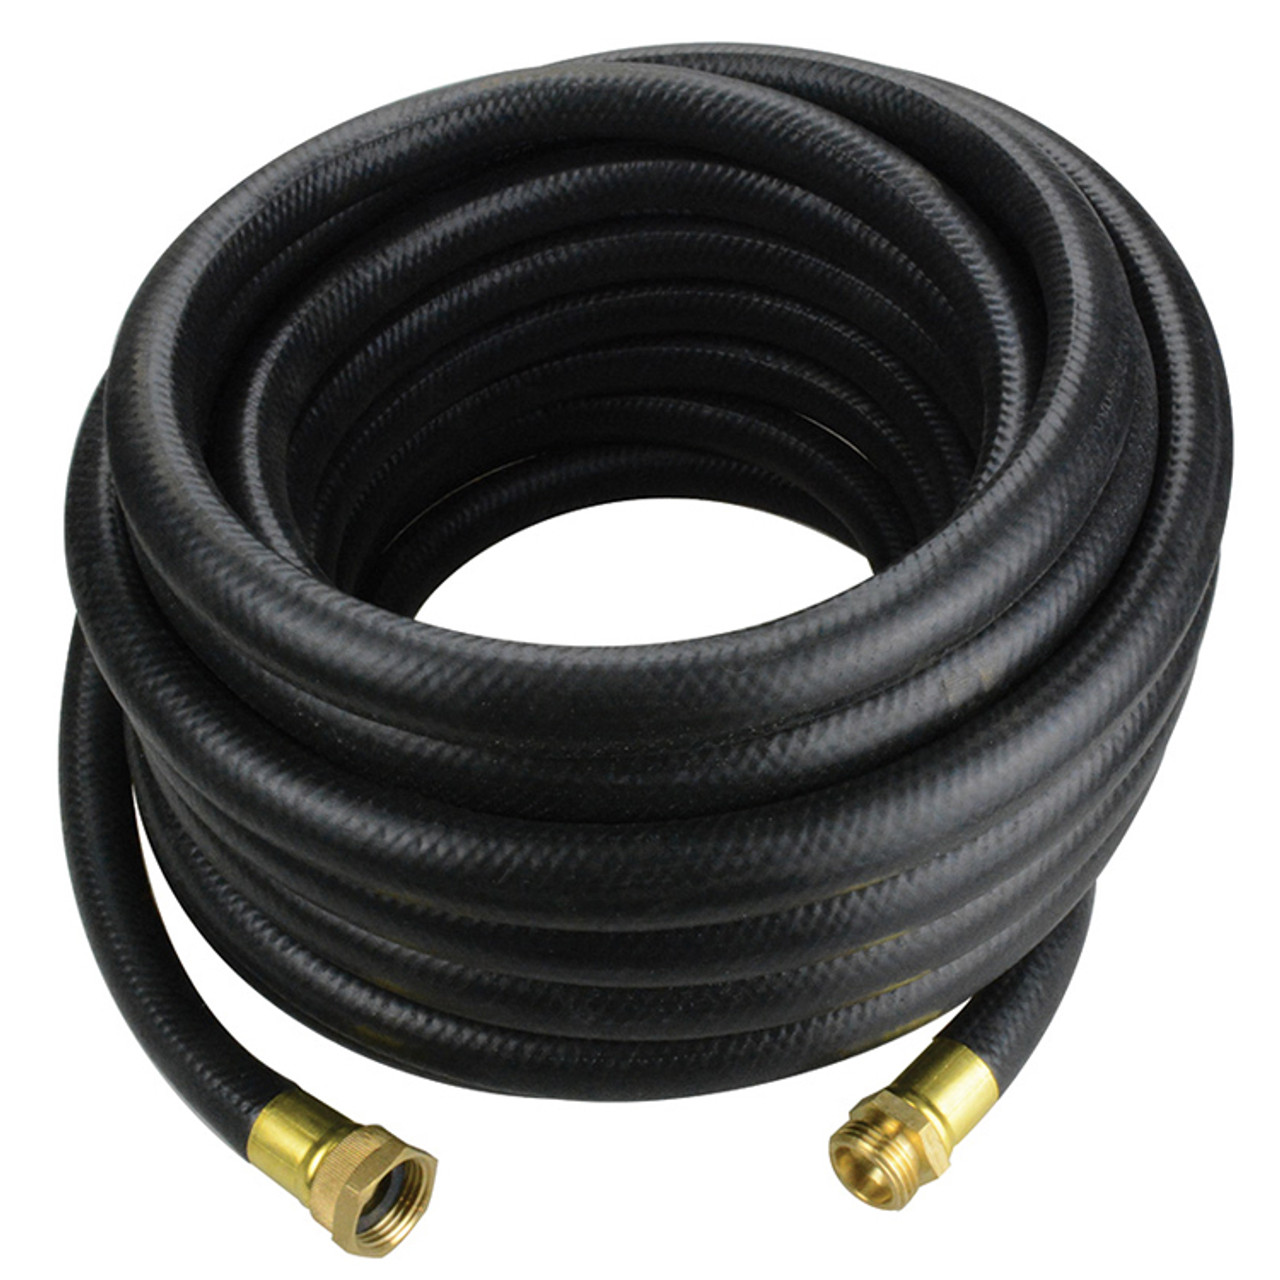 1/2" x 100' Industrial Water Hose Assembly   G311-050GHT100